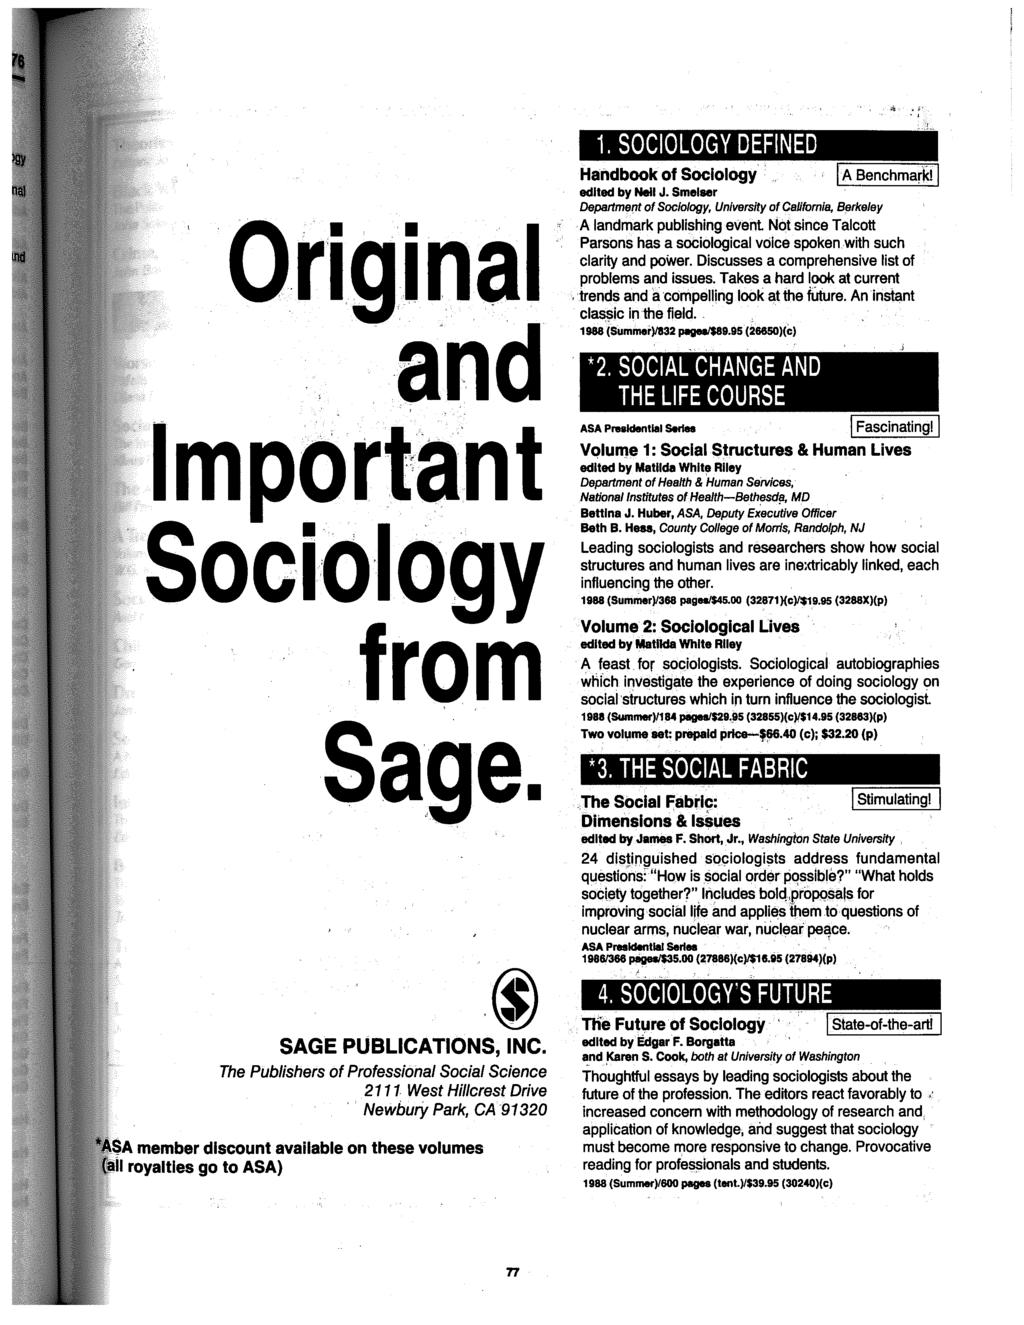 Original and ~ ' Important Soci:ology from Sage. SAGE PUBLICATIONS, INC.